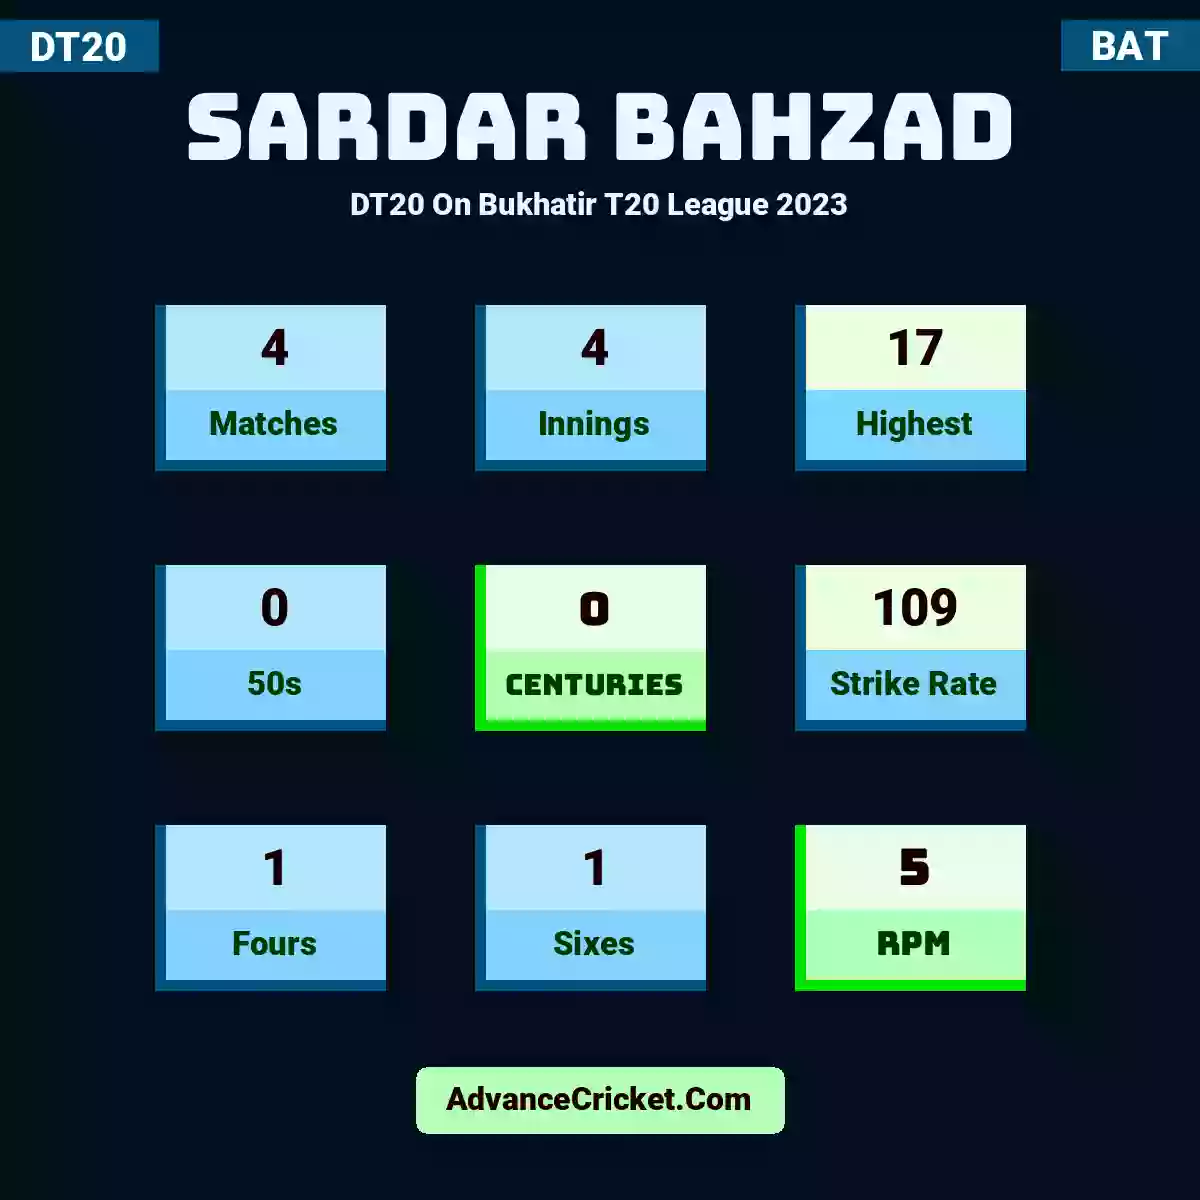 Sardar Bahzad DT20  On Bukhatir T20 League 2023, Sardar Bahzad played 4 matches, scored 17 runs as highest, 0 half-centuries, and 0 centuries, with a strike rate of 109. S.Bahzad hit 1 fours and 1 sixes, with an RPM of 5.